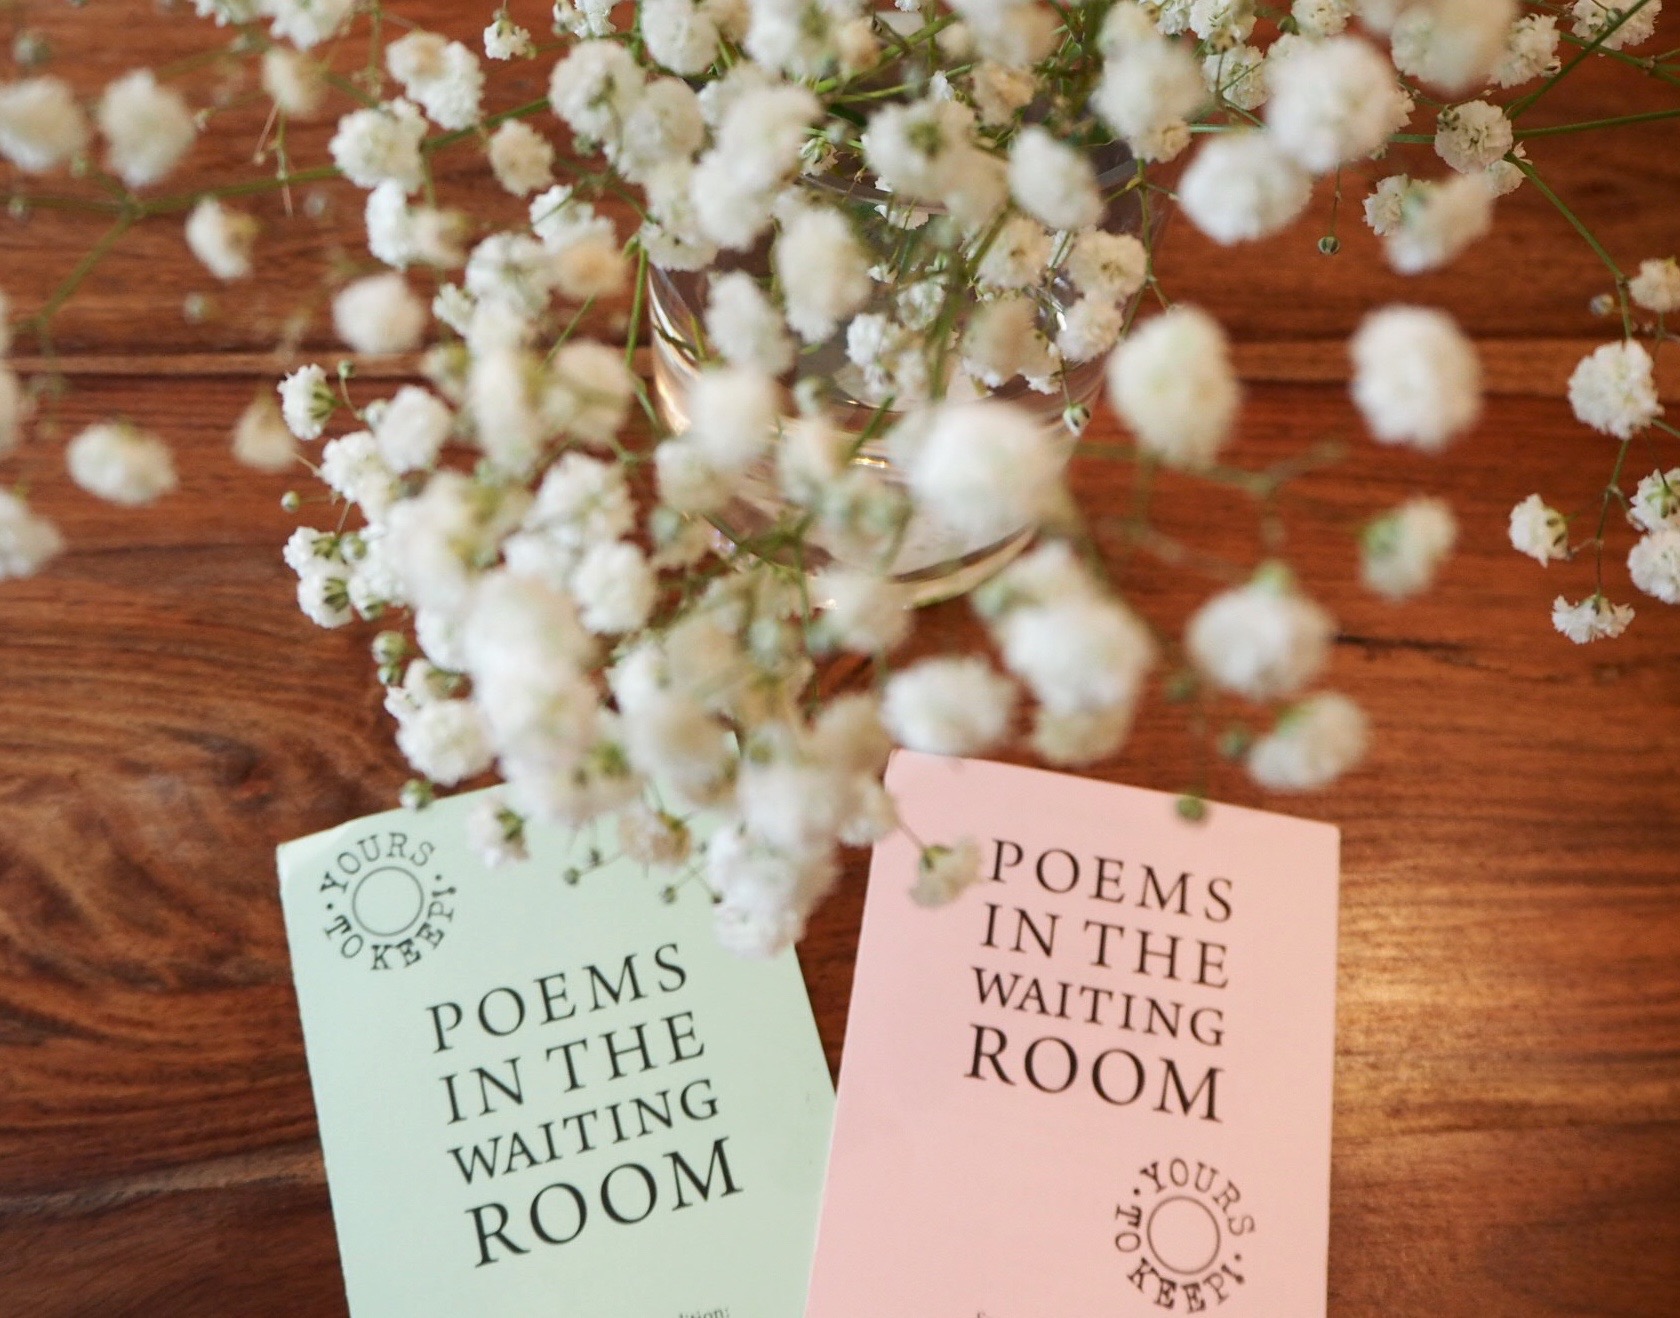 Poems in the waiting room